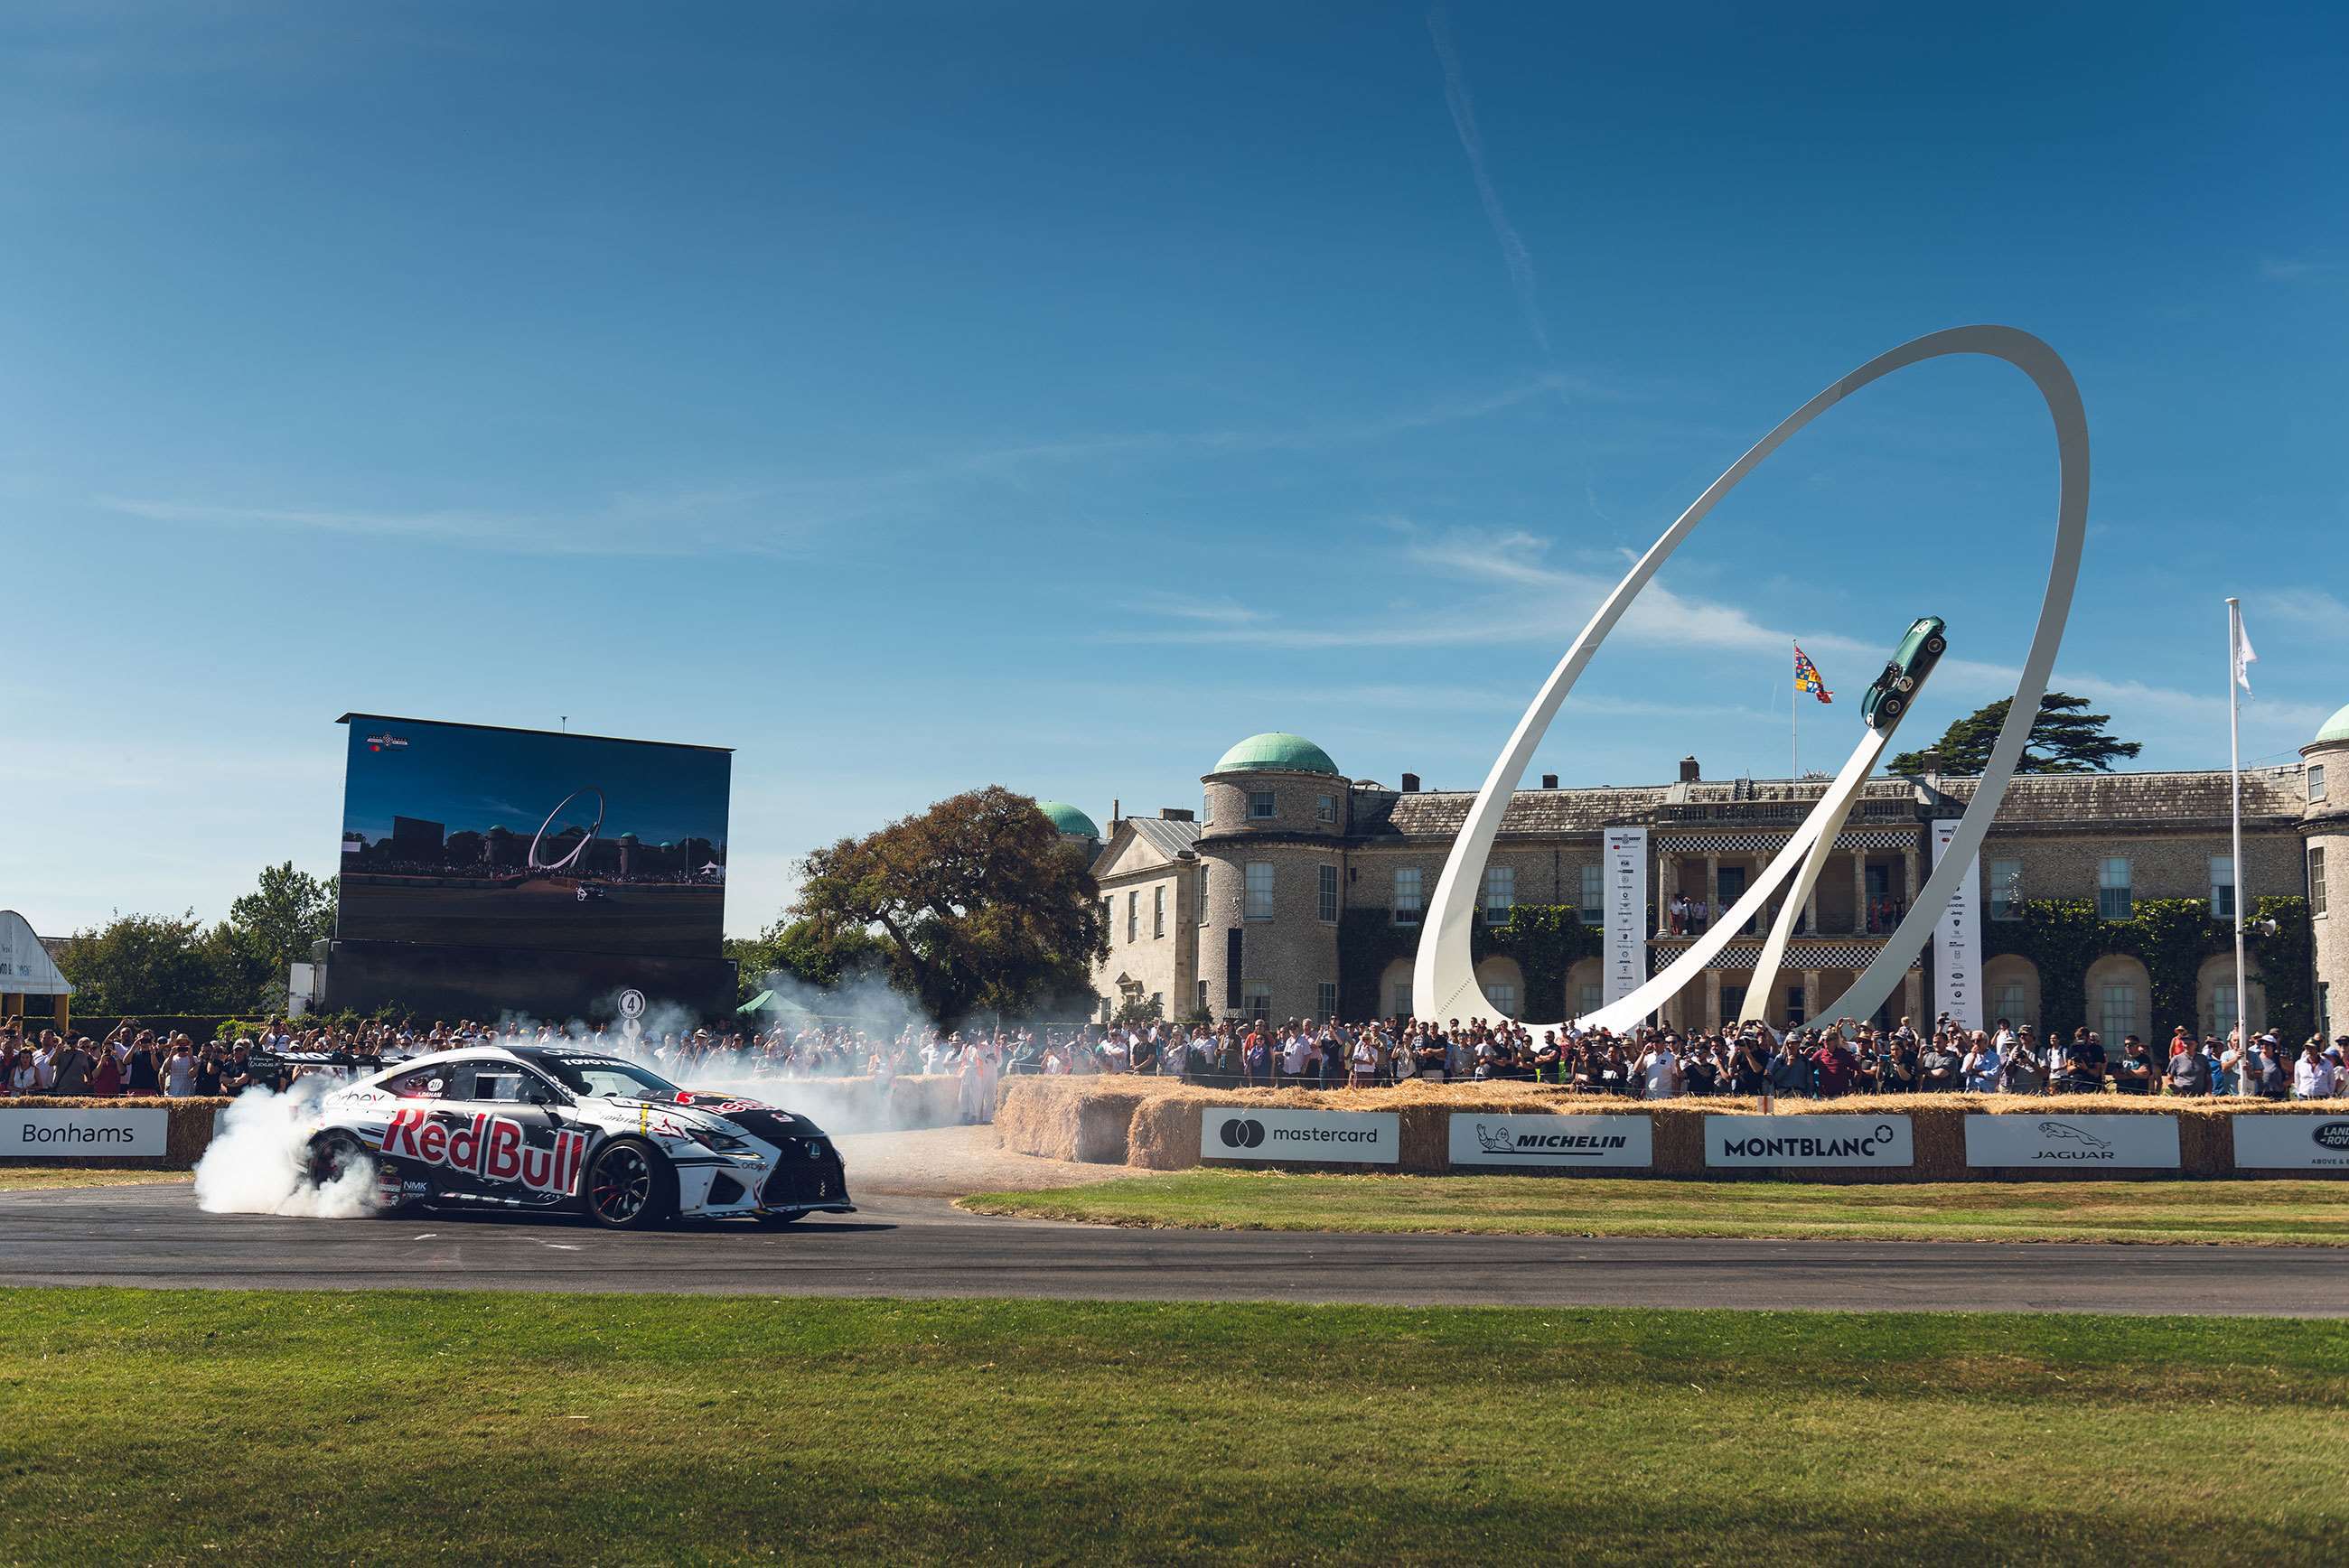 valentines-day-gift-guide-goodwood-festival-of-speed-tickets-2019-jordan-butters-goodwood-12022020.jpg